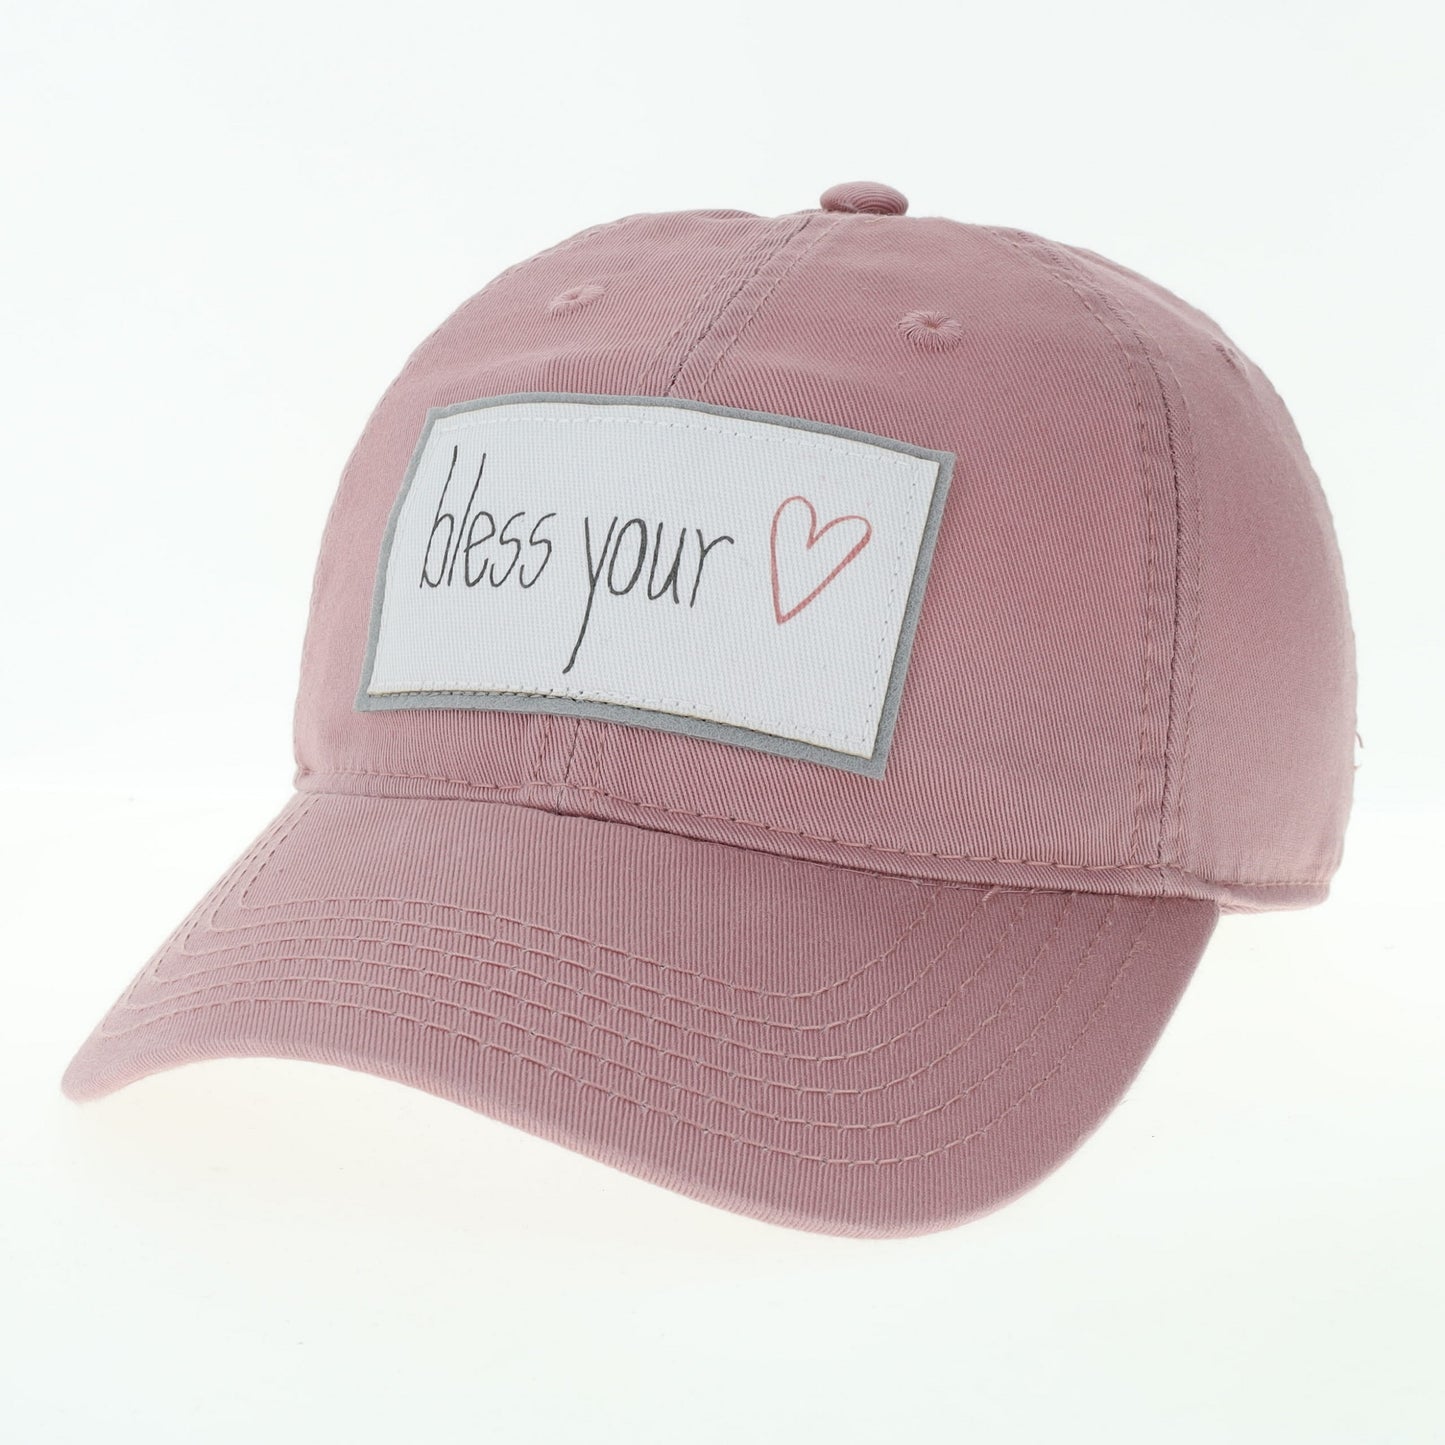 Bless Your ❤️ Relaxed Twill Hat in Dusty Rose